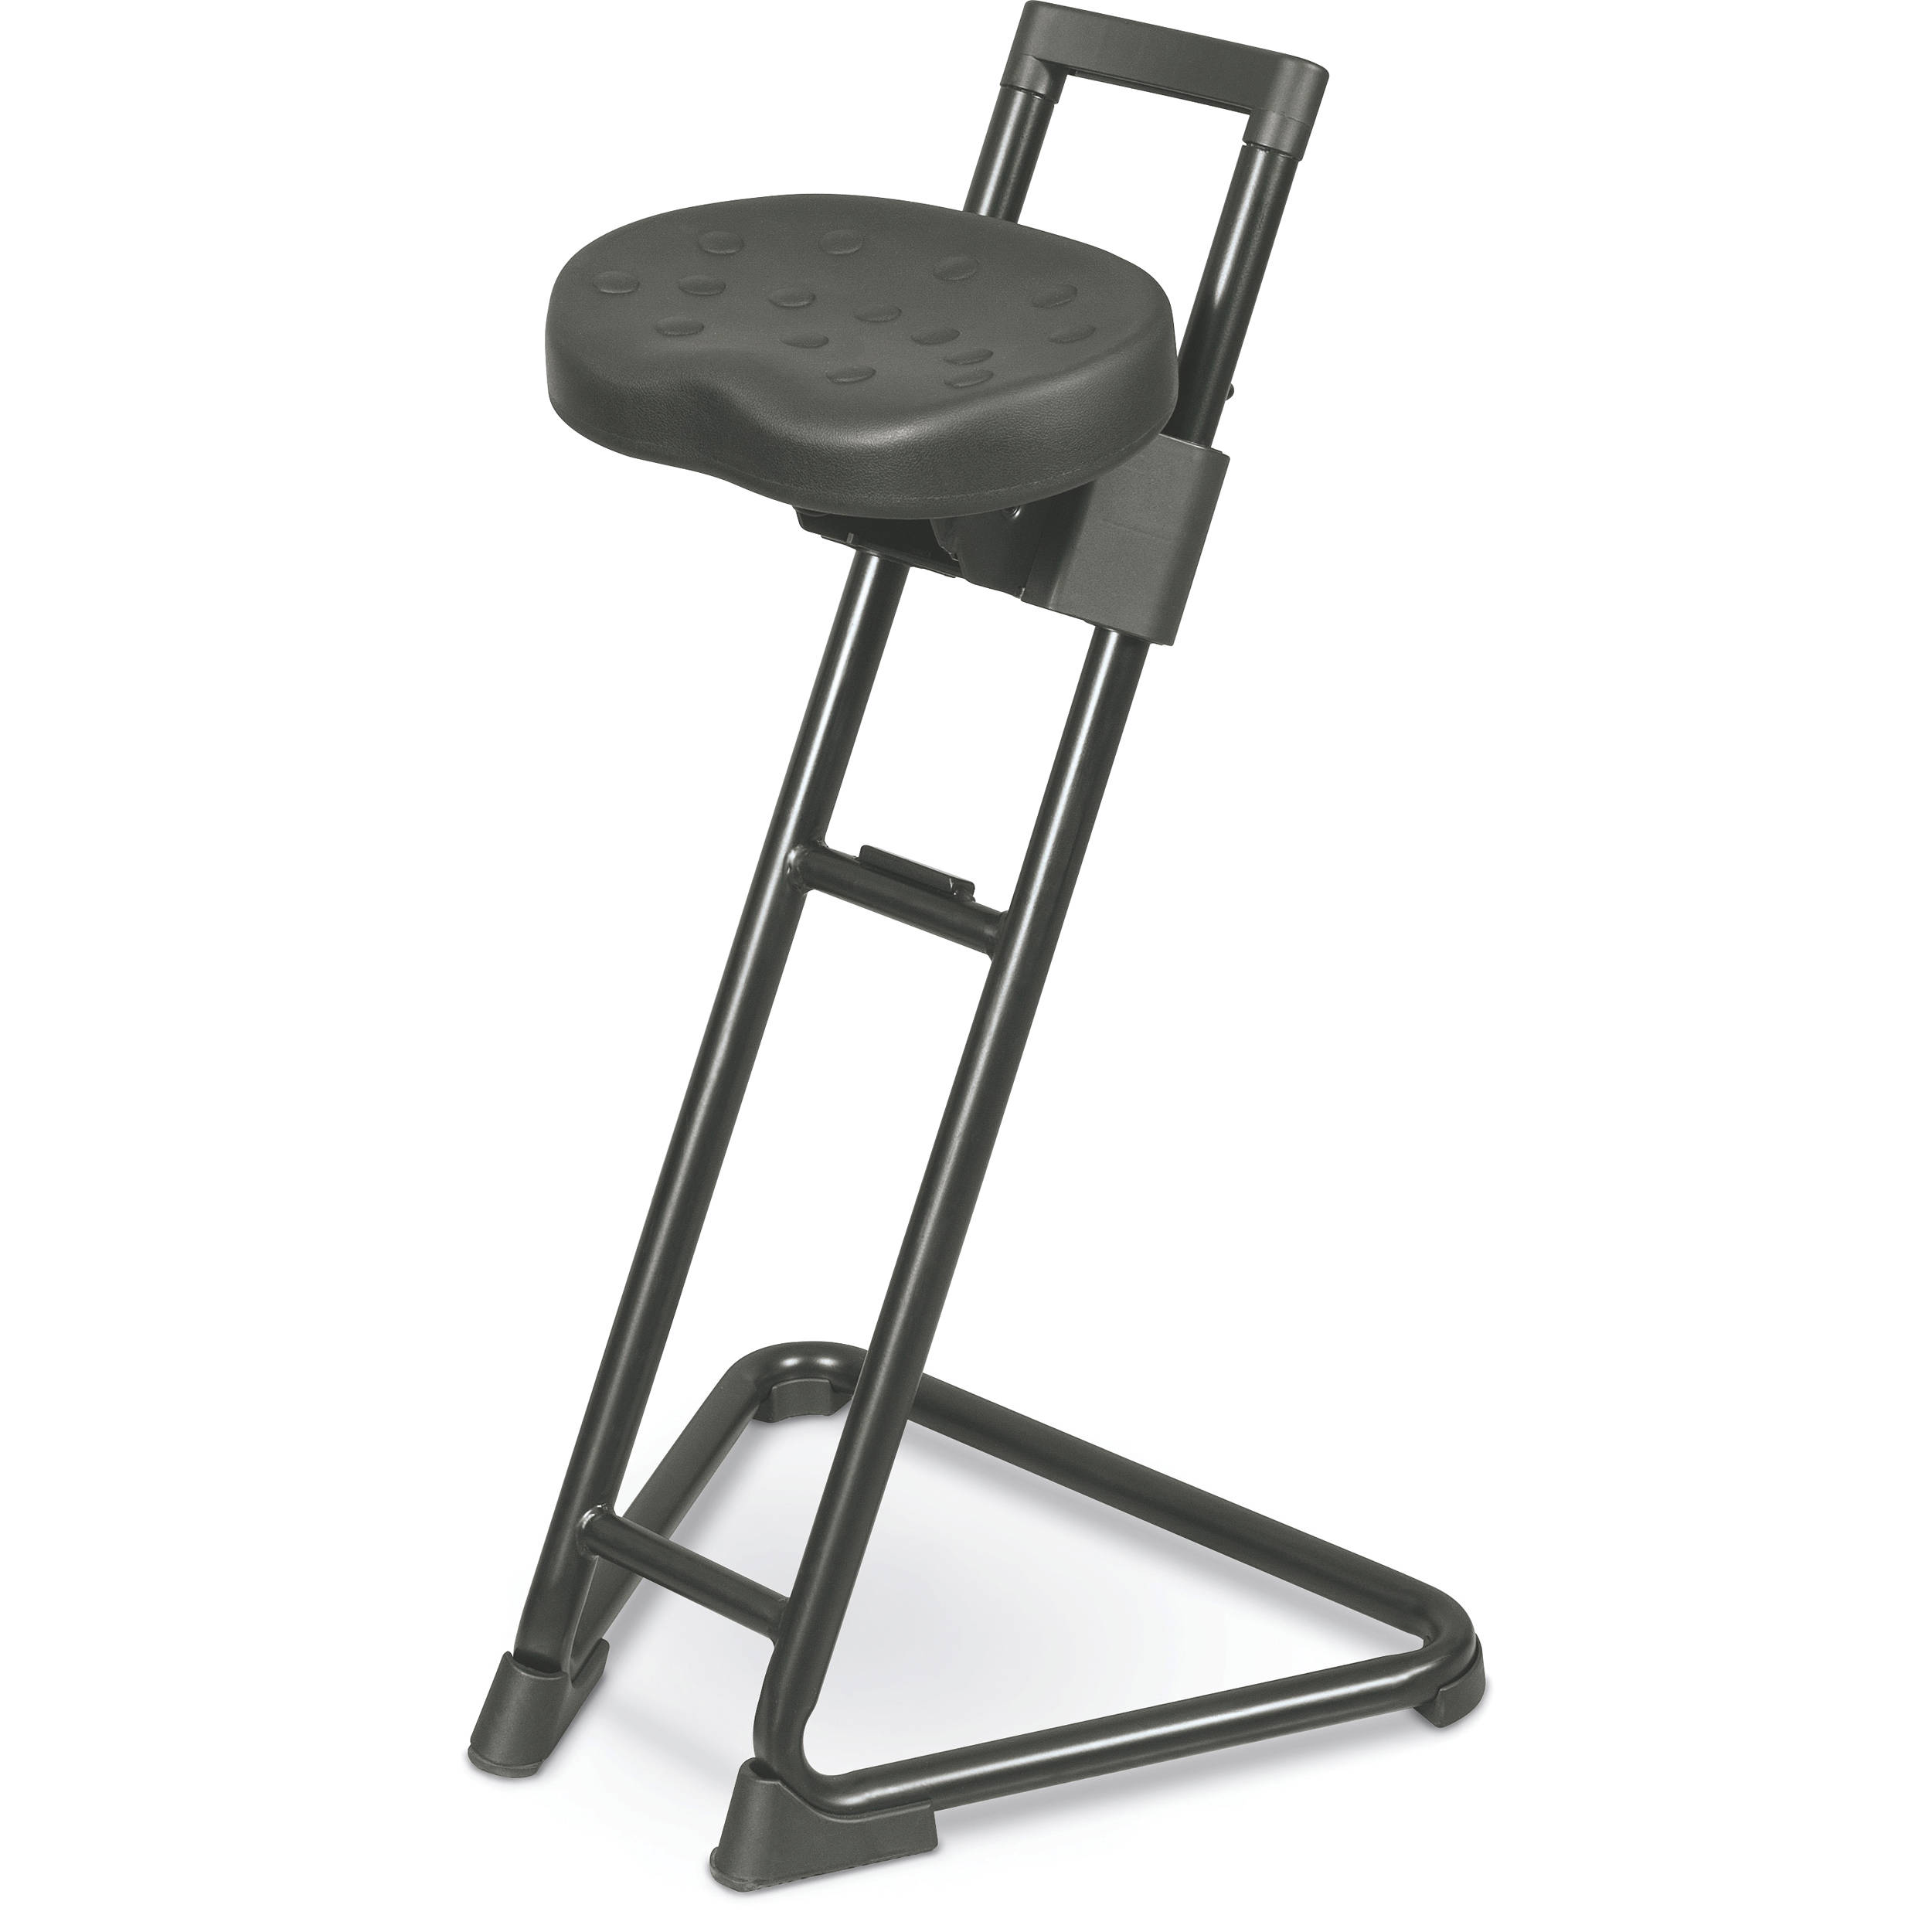 Top Adjustable Desk Stool of all time Learn more here 